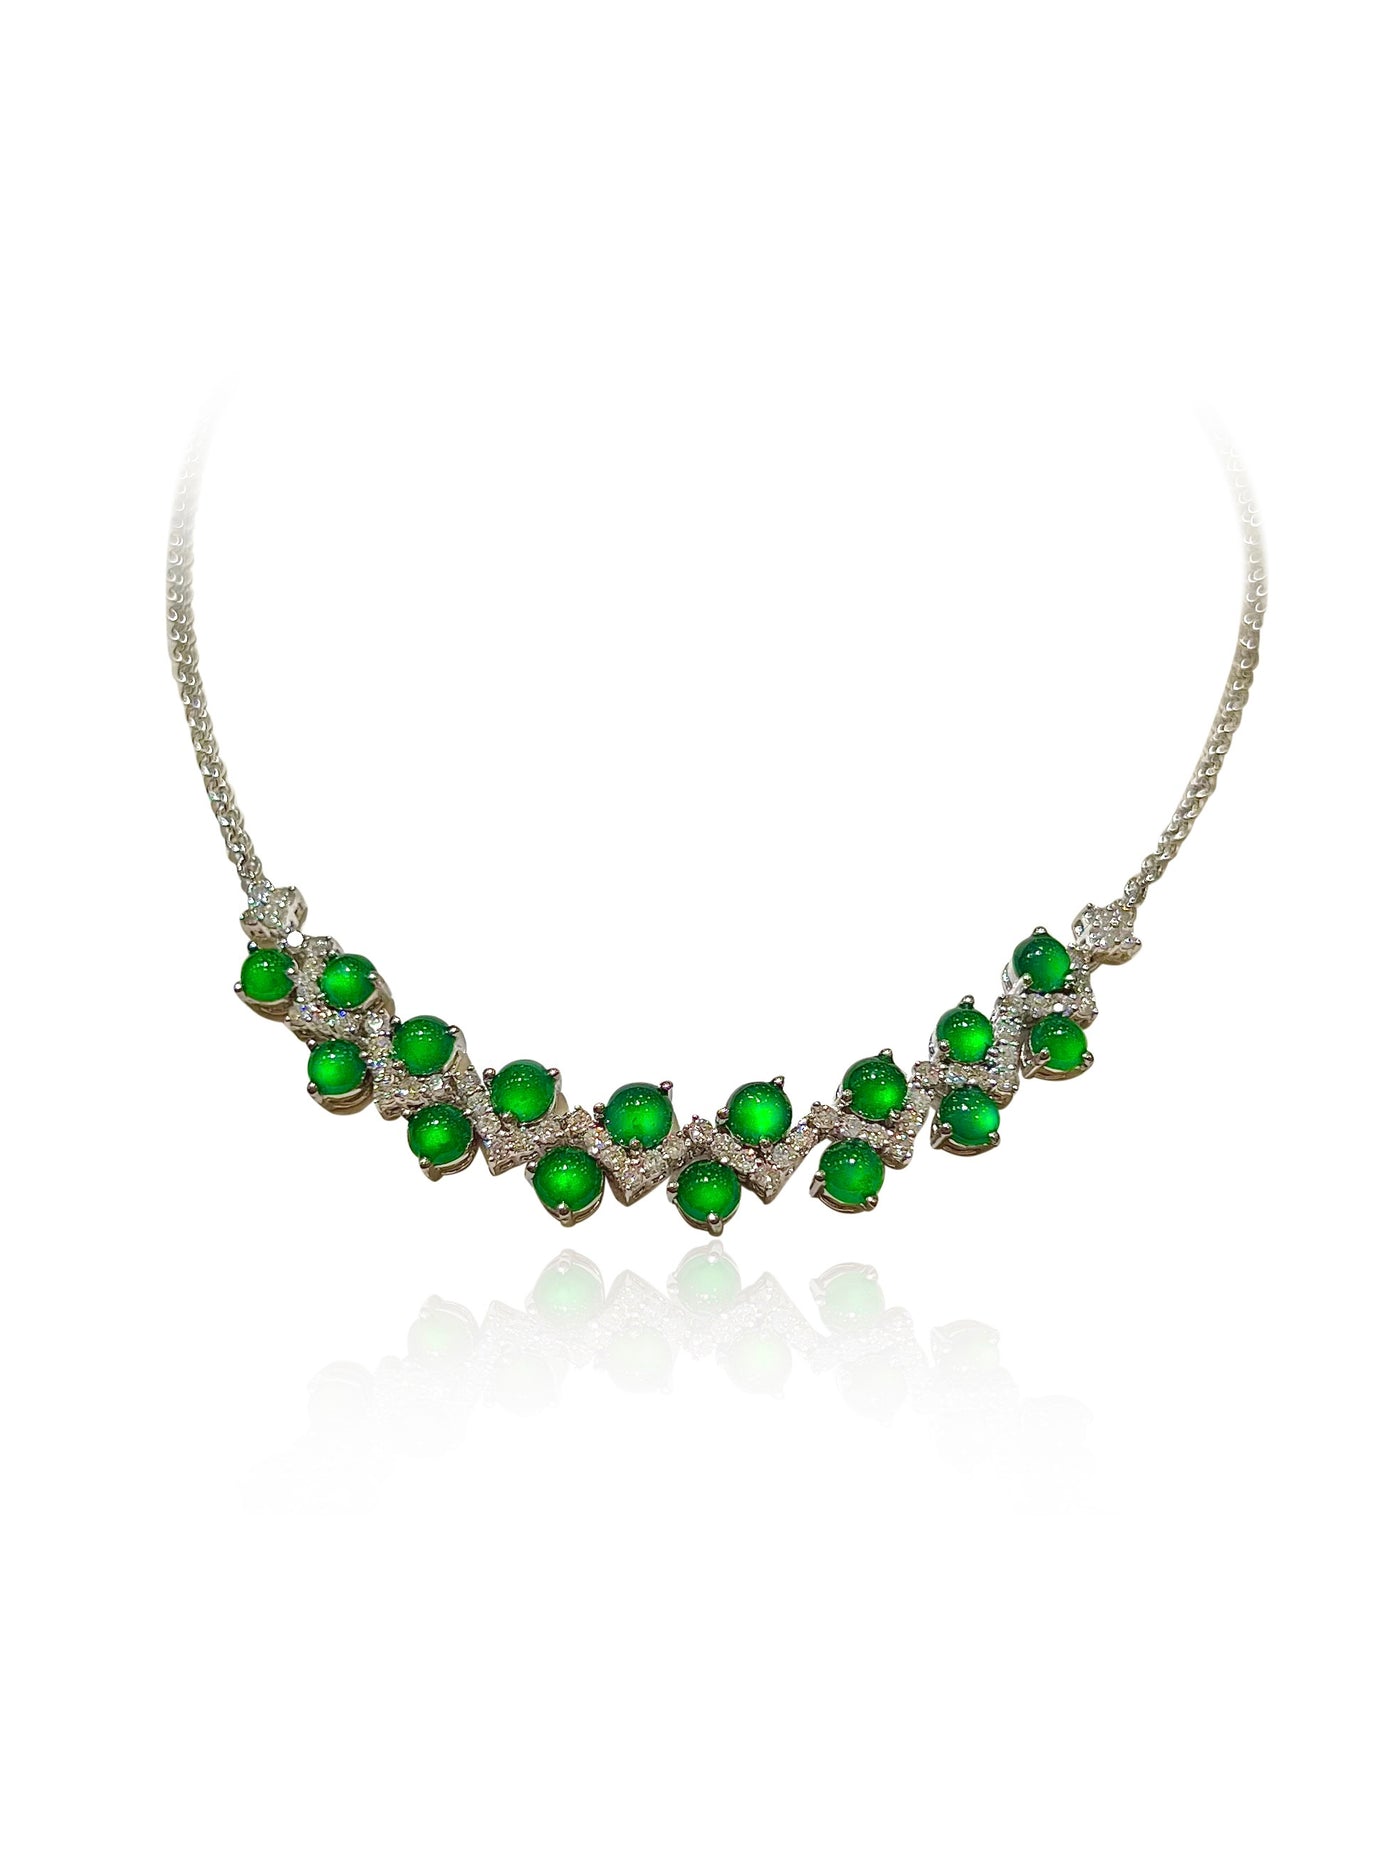 Smiley Jadeite necklace in 18k white gold and diamonds